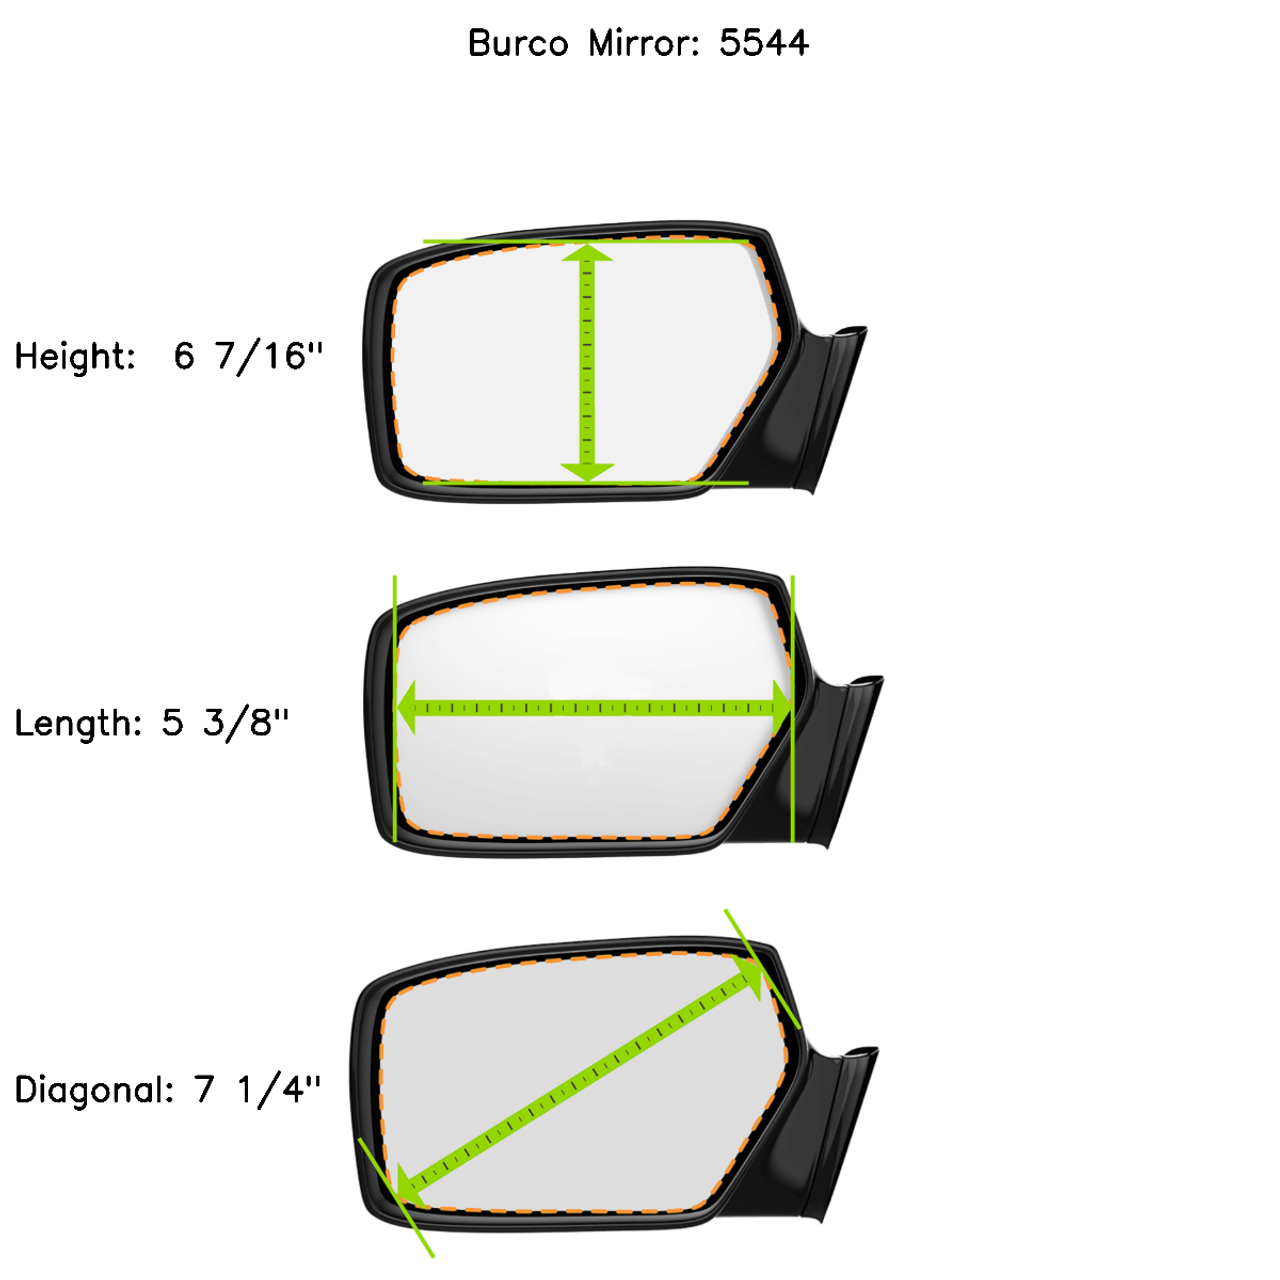 Fits 13-14 Outback, Impreza, XC Crosstrek 14-16 Forester Right Pass Mirror Glass Lens For Models w/out Signal